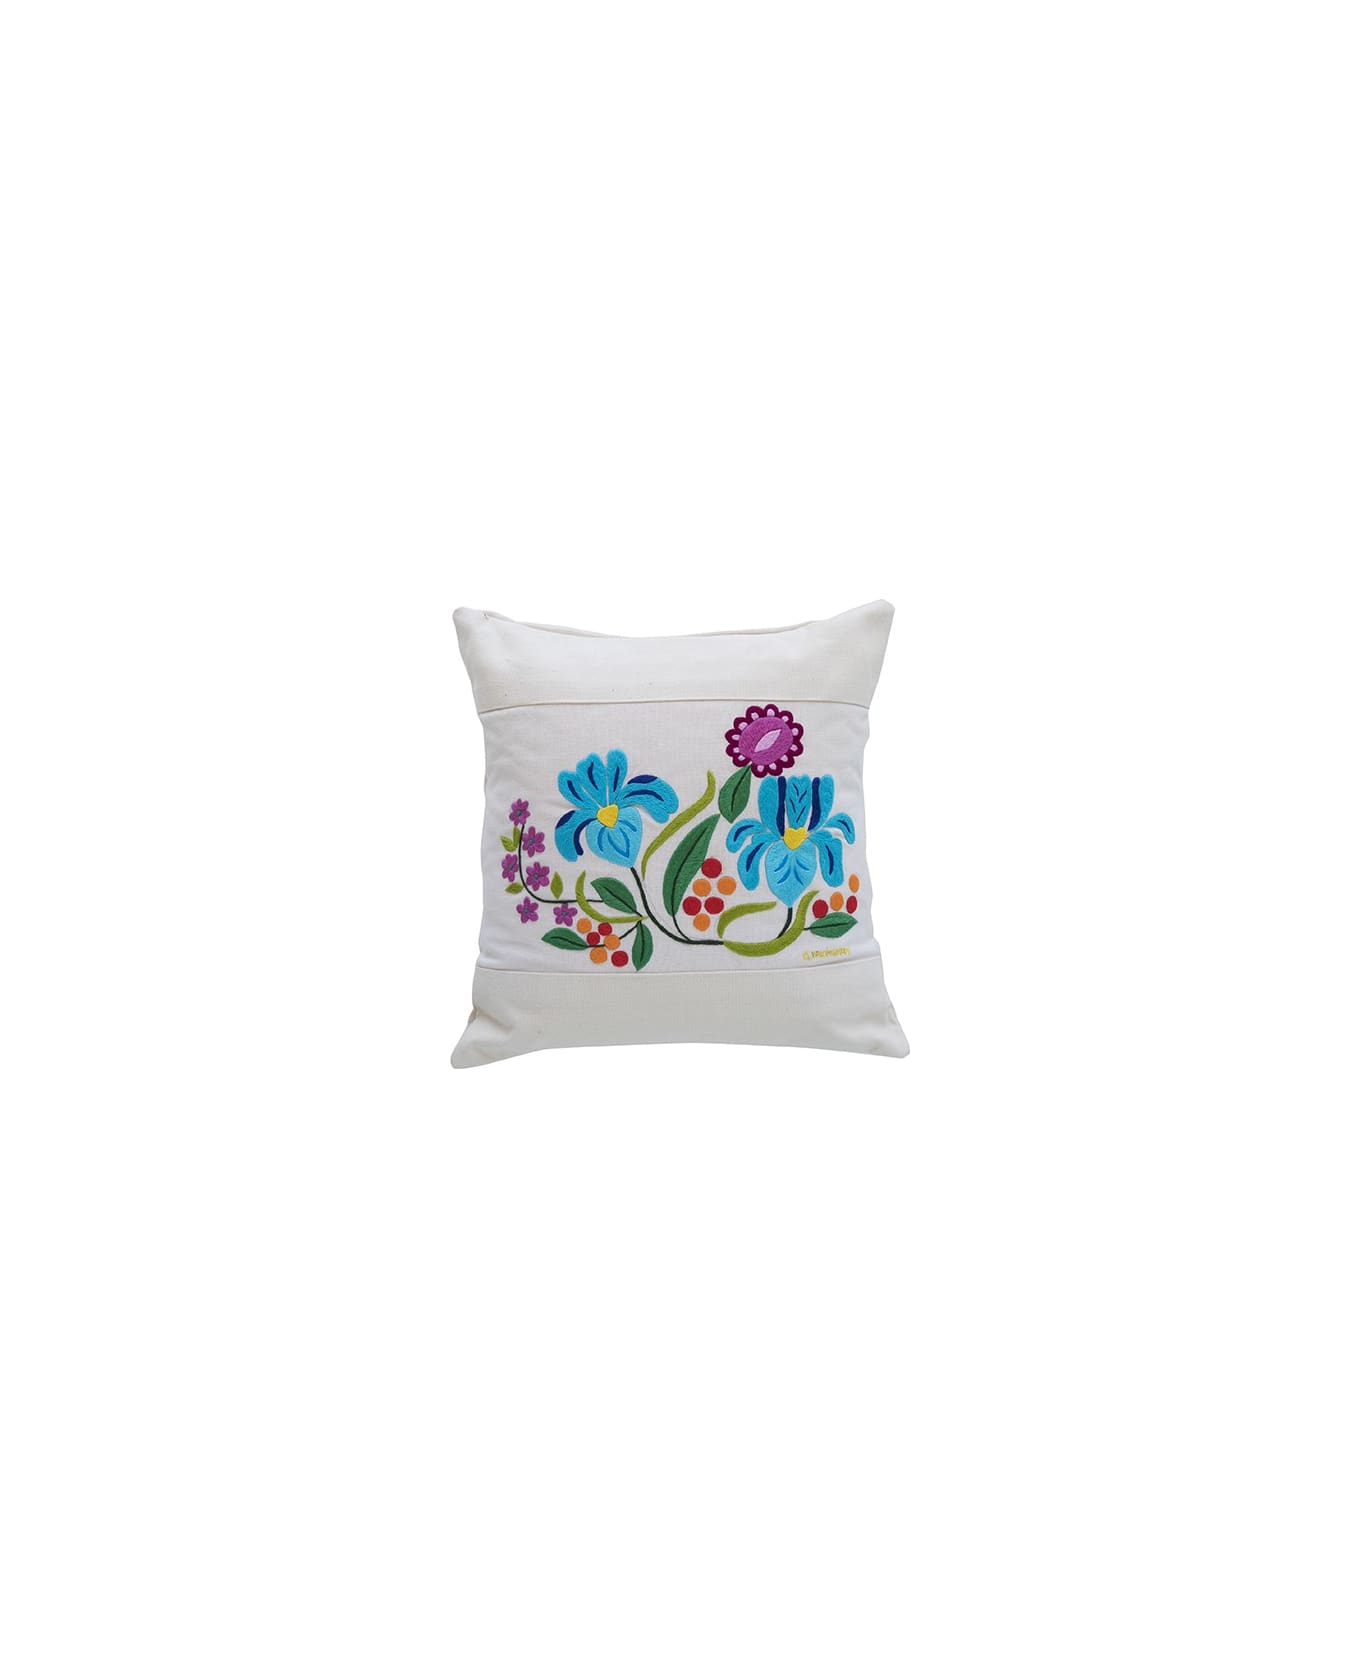 Le Botteghe su Gologone Cushions Embroidered 50x50 Cm - White クッション